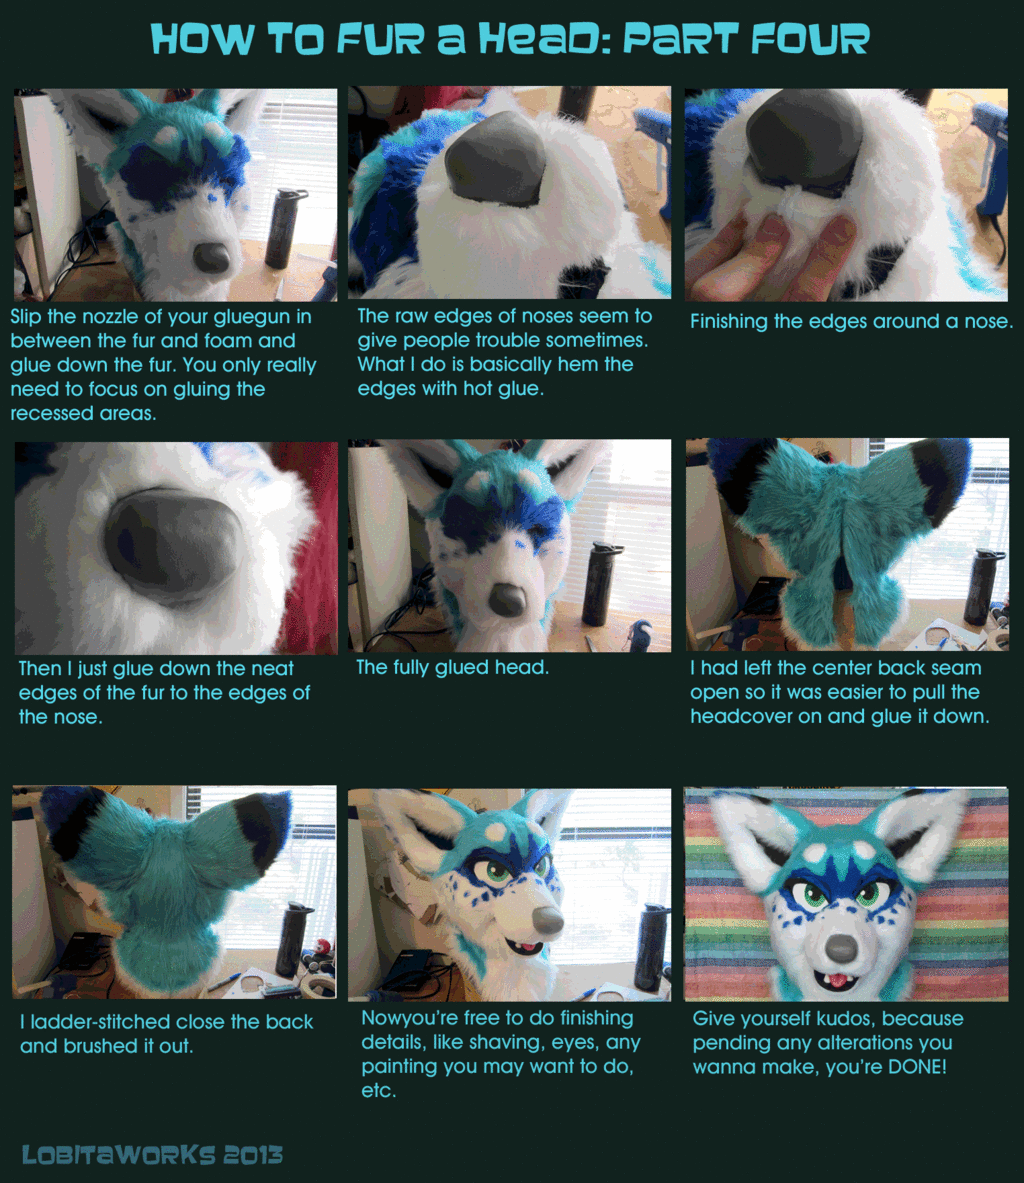 How to Fur a Head: Part Four